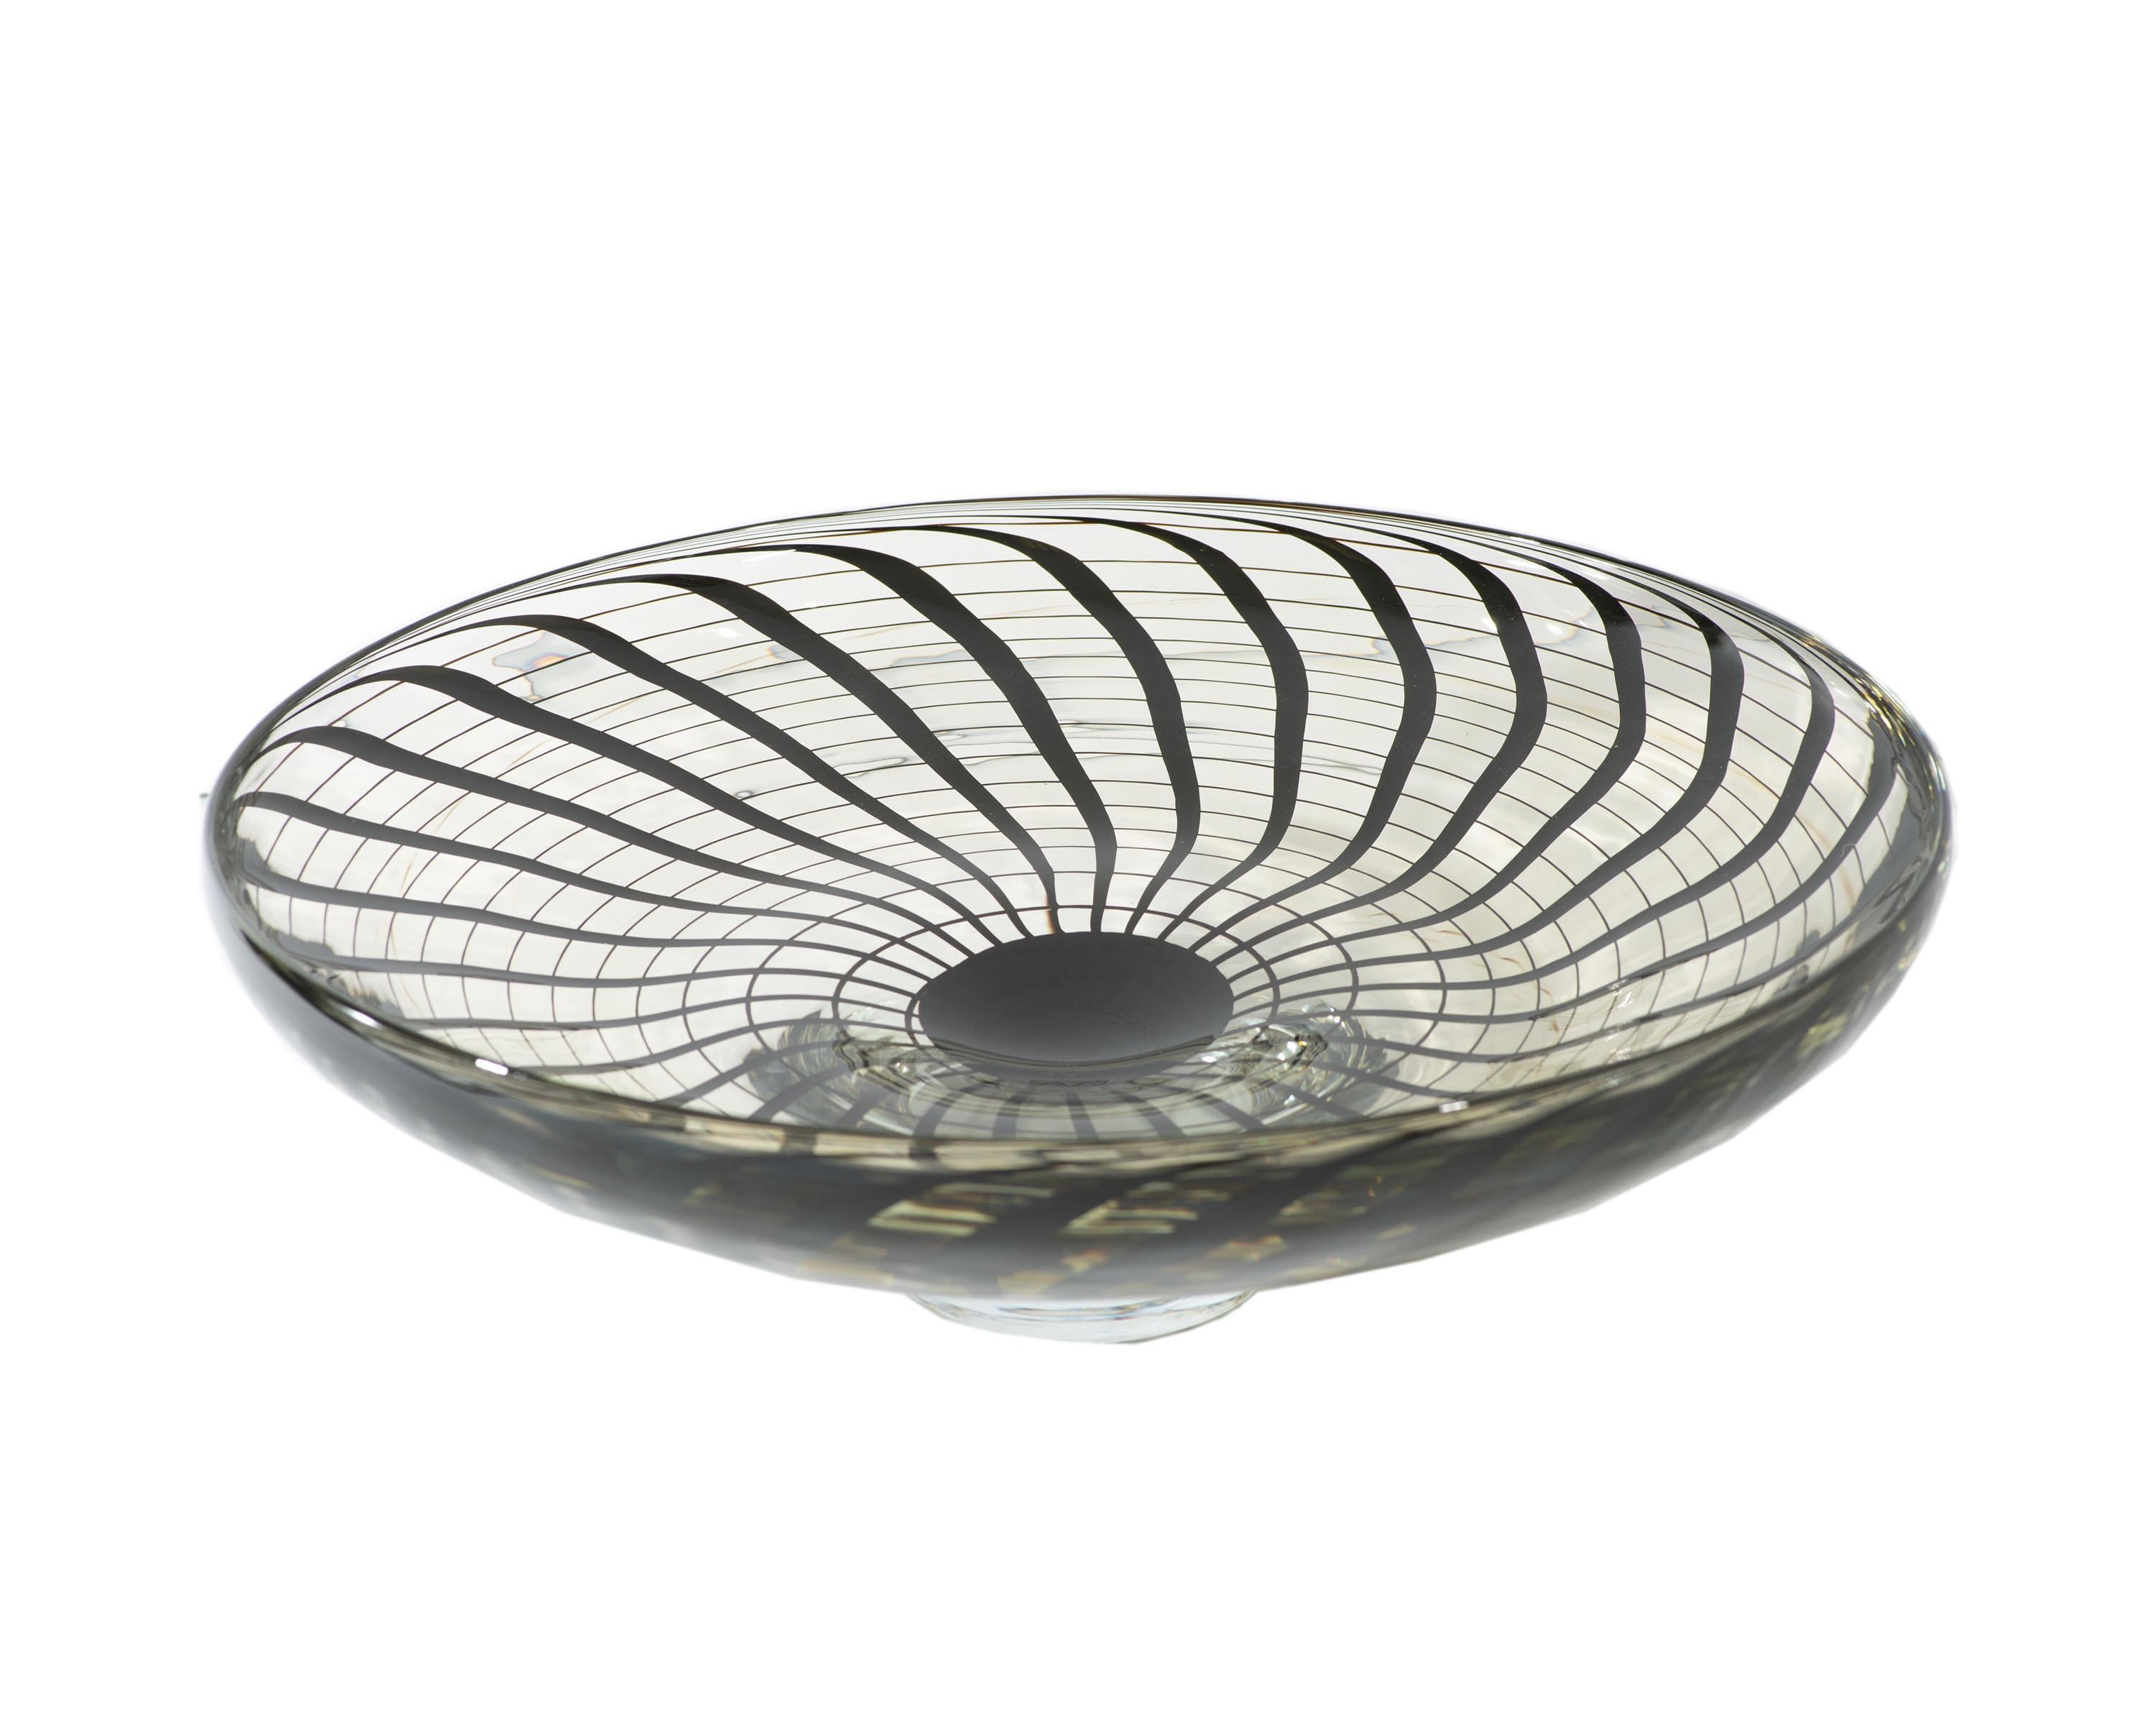 A 2002 Murano art glass centerpiece bowl by the Italian glass artist Alberto Donà. This footed bowl is made of a lightly tinted clear glass with an opaque inner black spiral that winds outward from the center. Overlapping the central spiral are